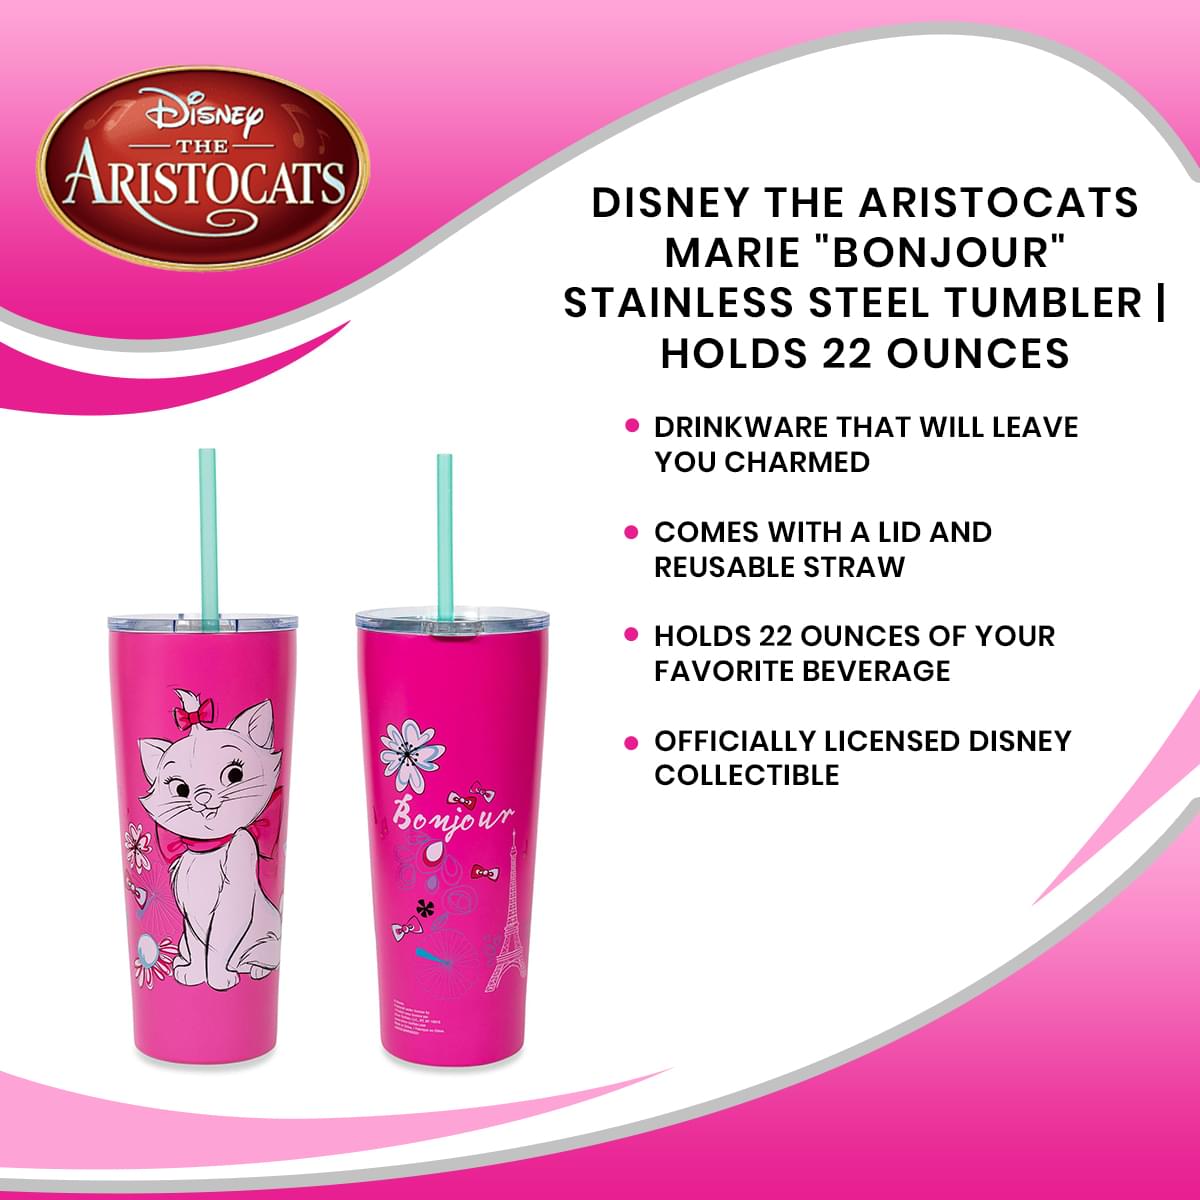 Disney The Aristocats Marie "Bonjour" Stainless Steel Tumbler | Holds 22 Ounces